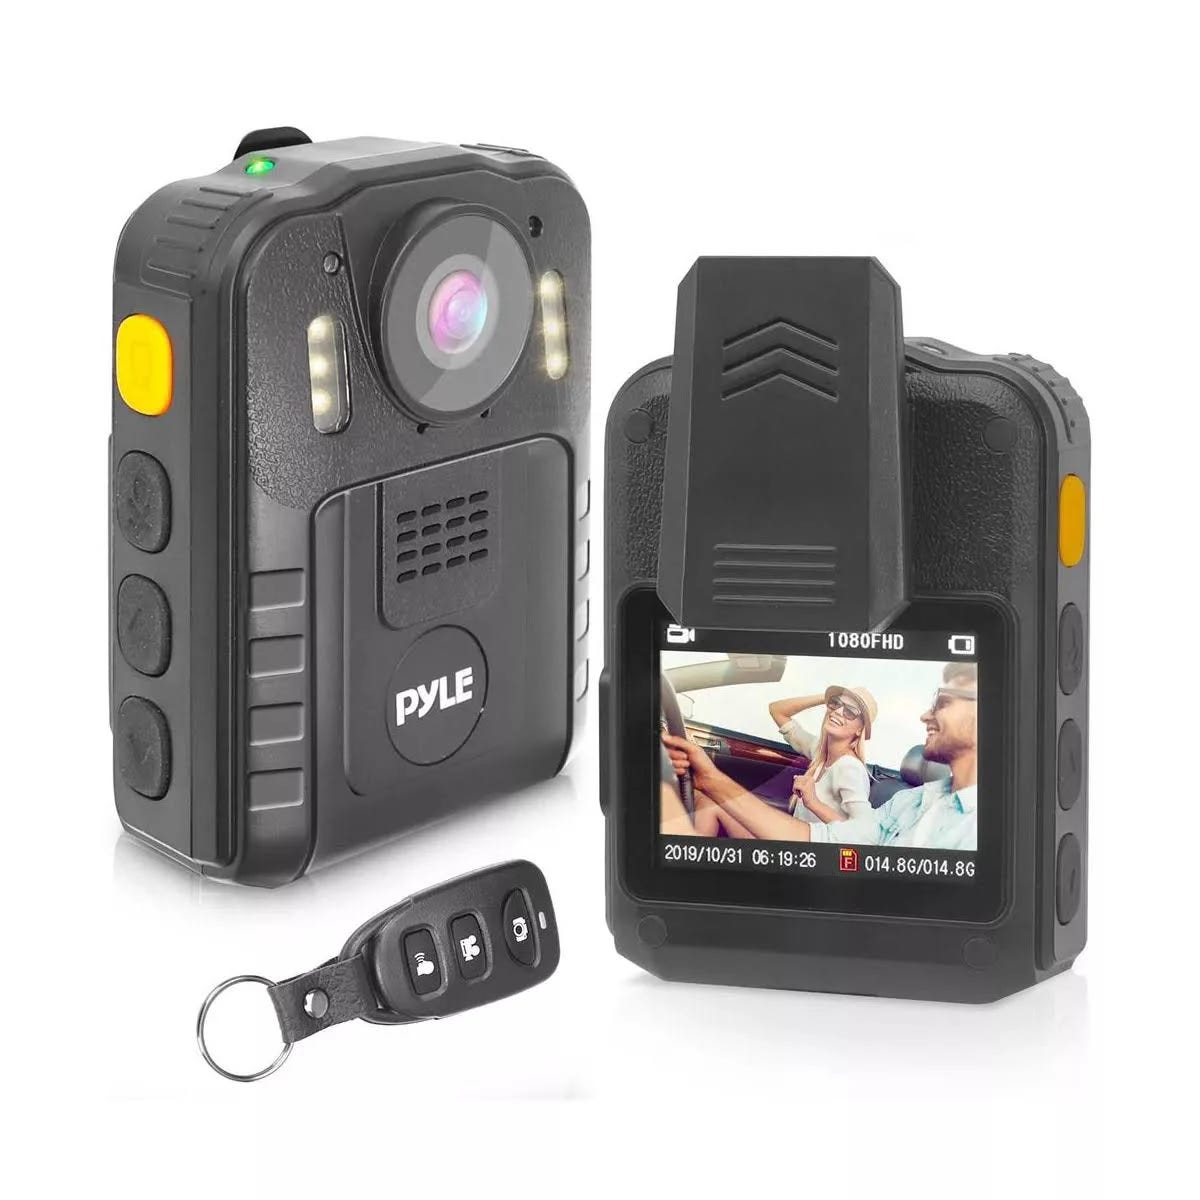 Pyle PPBCM92 Compact Wireless Night Vision Police Body Camera | Image